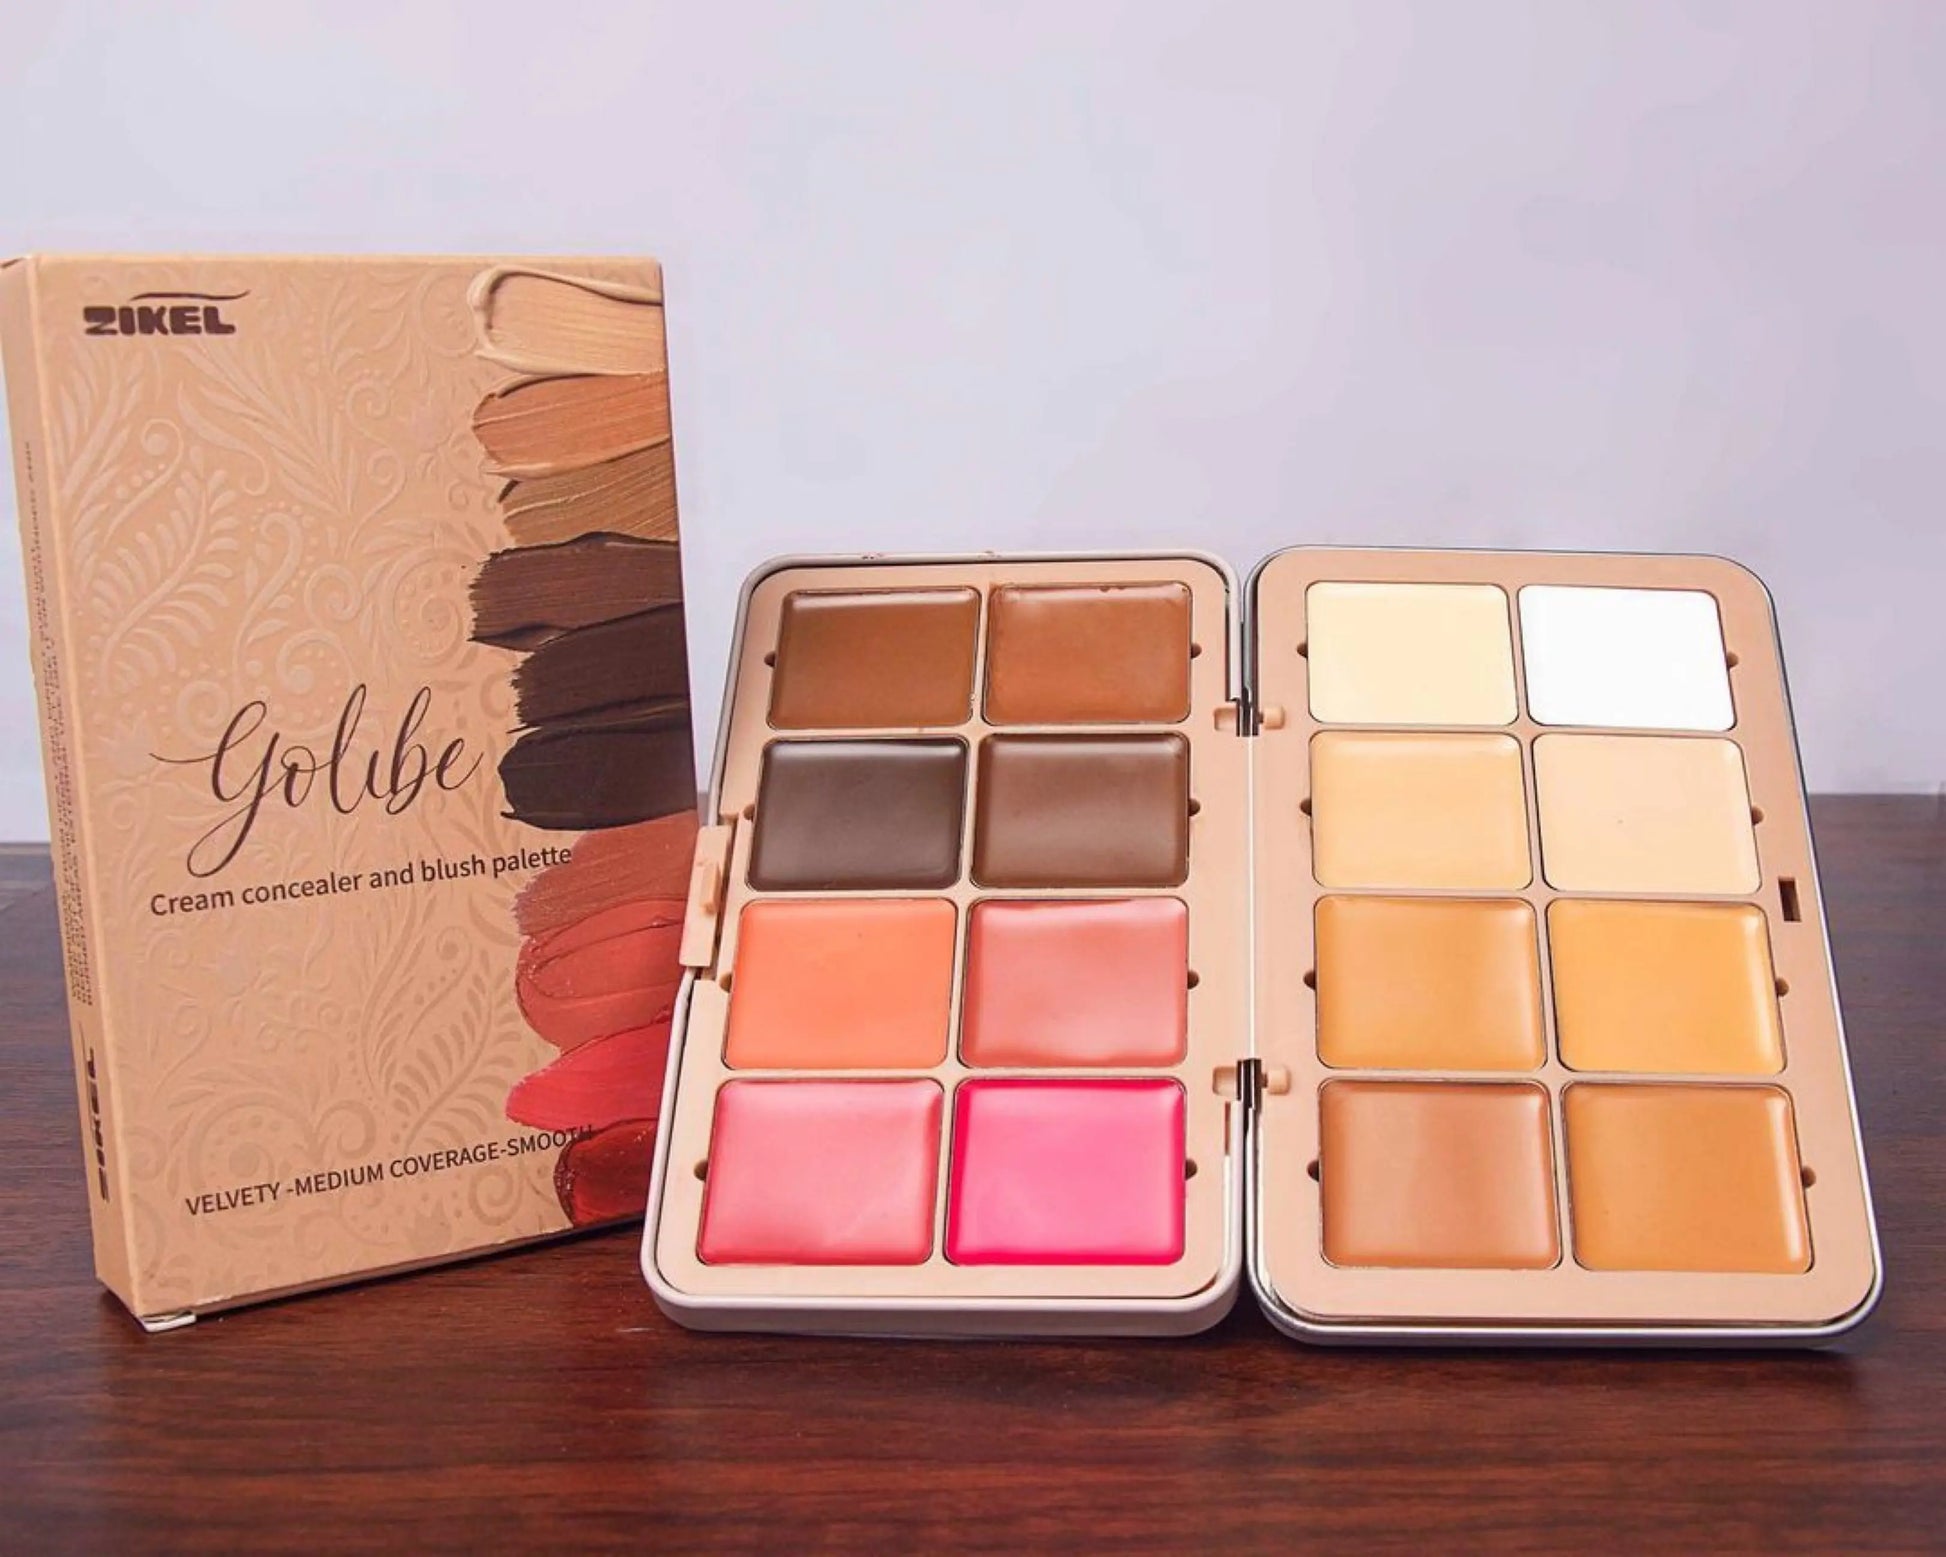 Zikel Golibe 2in 1 Lip and Concealer Palette La Mimz Beauty & Fashion Store